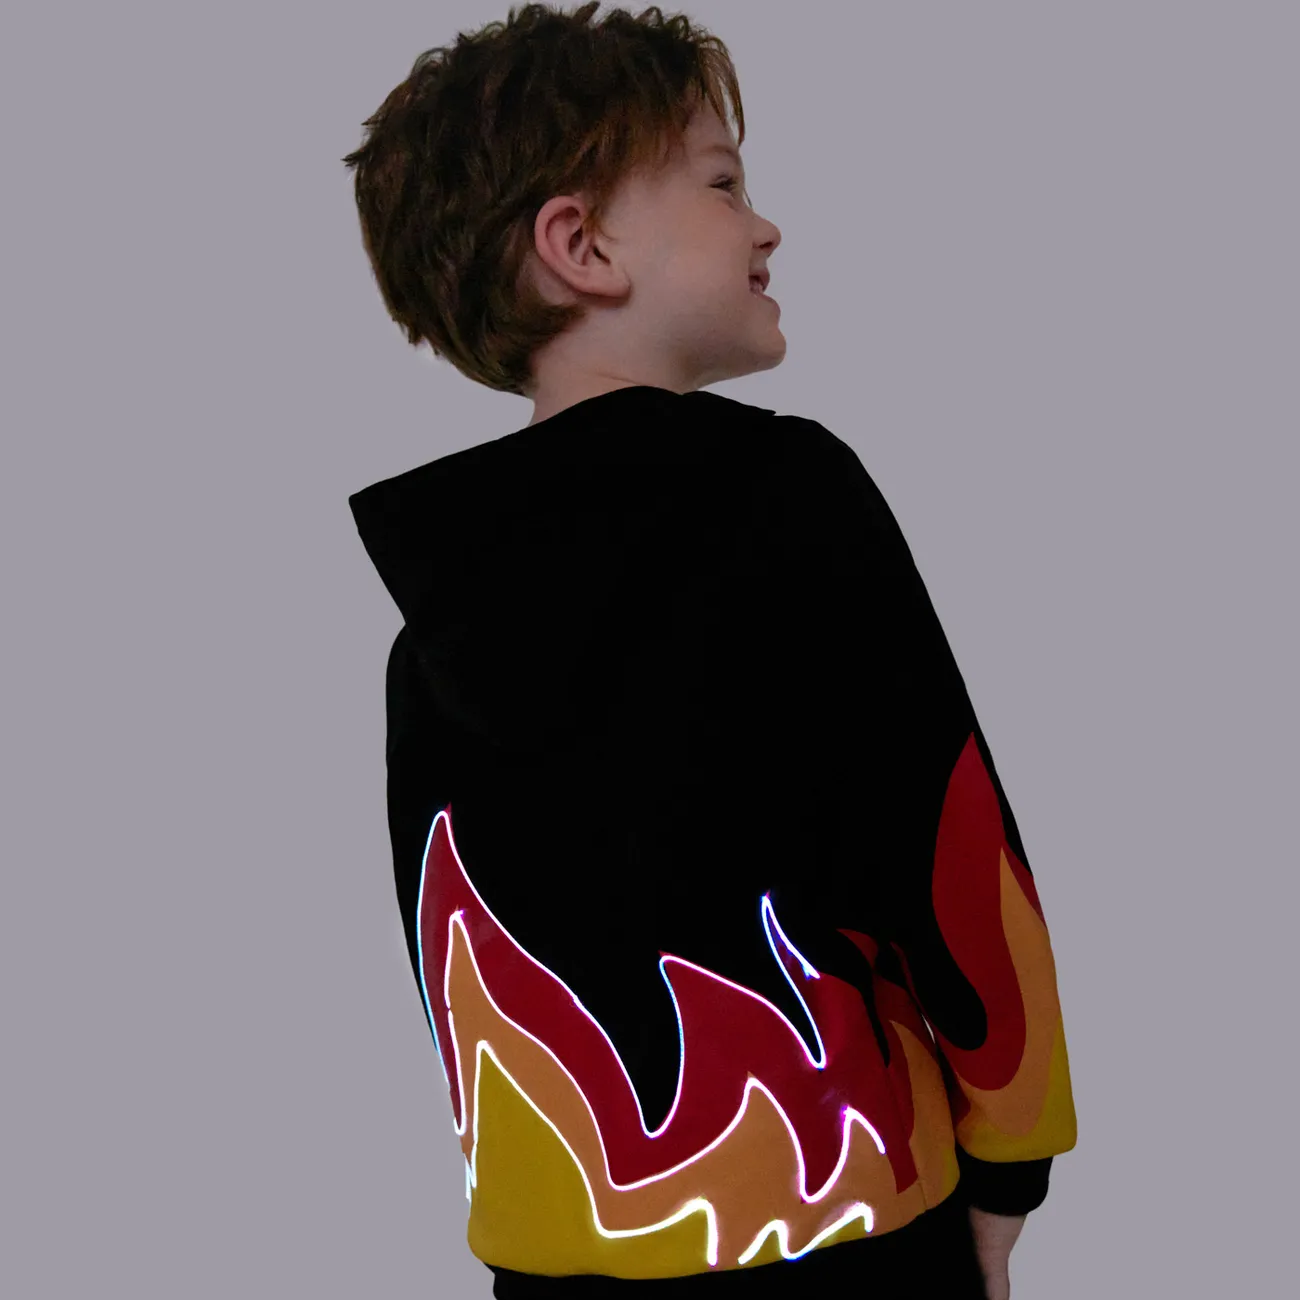 Go-Glow Illuminating Jacket with Light Up Flames Including Controller (Built-In Battery) Black big image 1